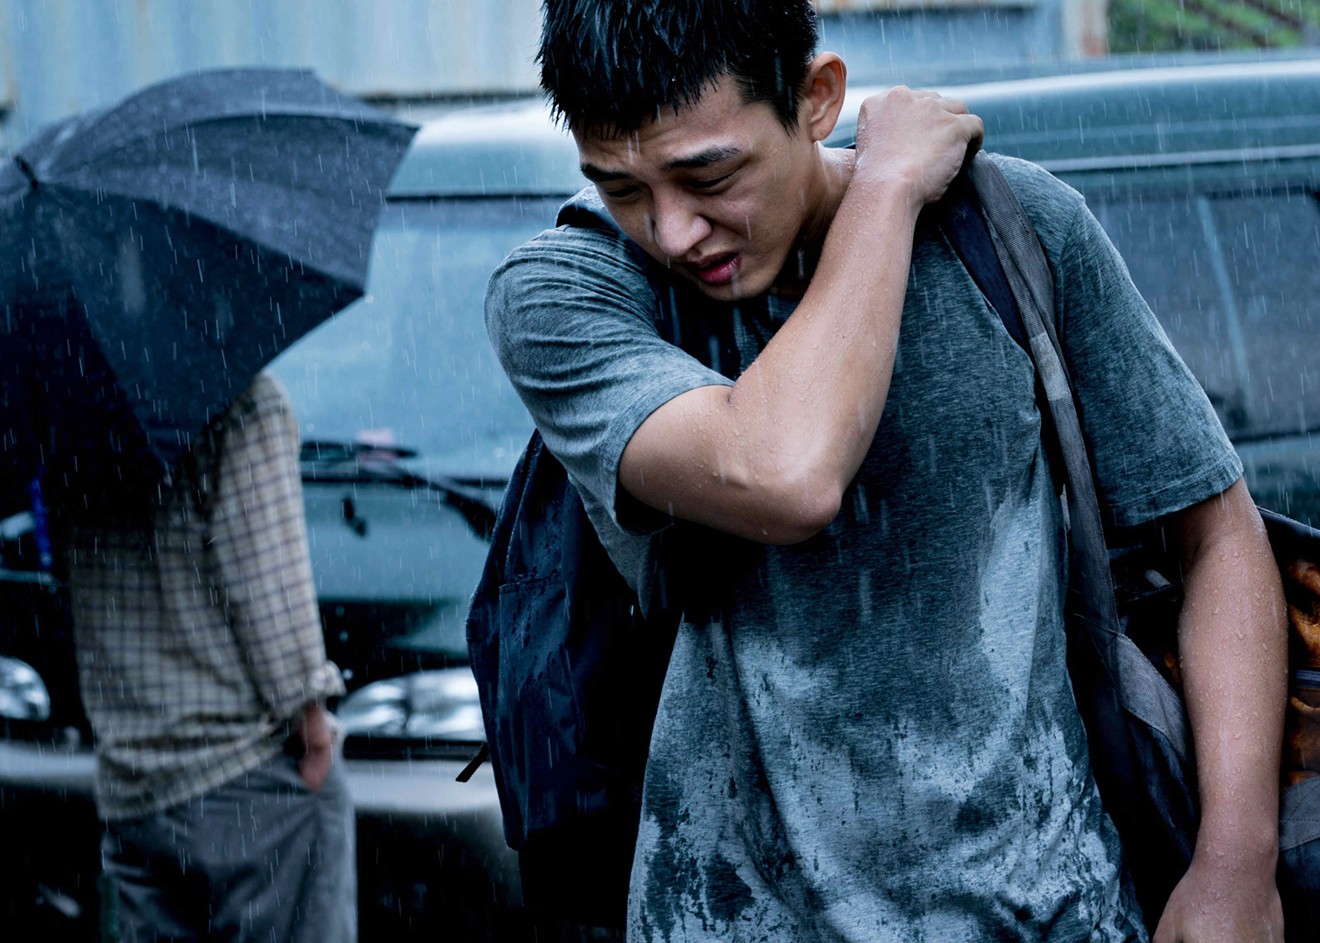 Yoo Ah-in plays Jongsu, a sturdy, shy day laborer who falls for the lovely, lively Haemi after seeing her for the first time in years, in Korean director Lee Chang-dong’s Burning — a look at obsession, class and romantic torment.